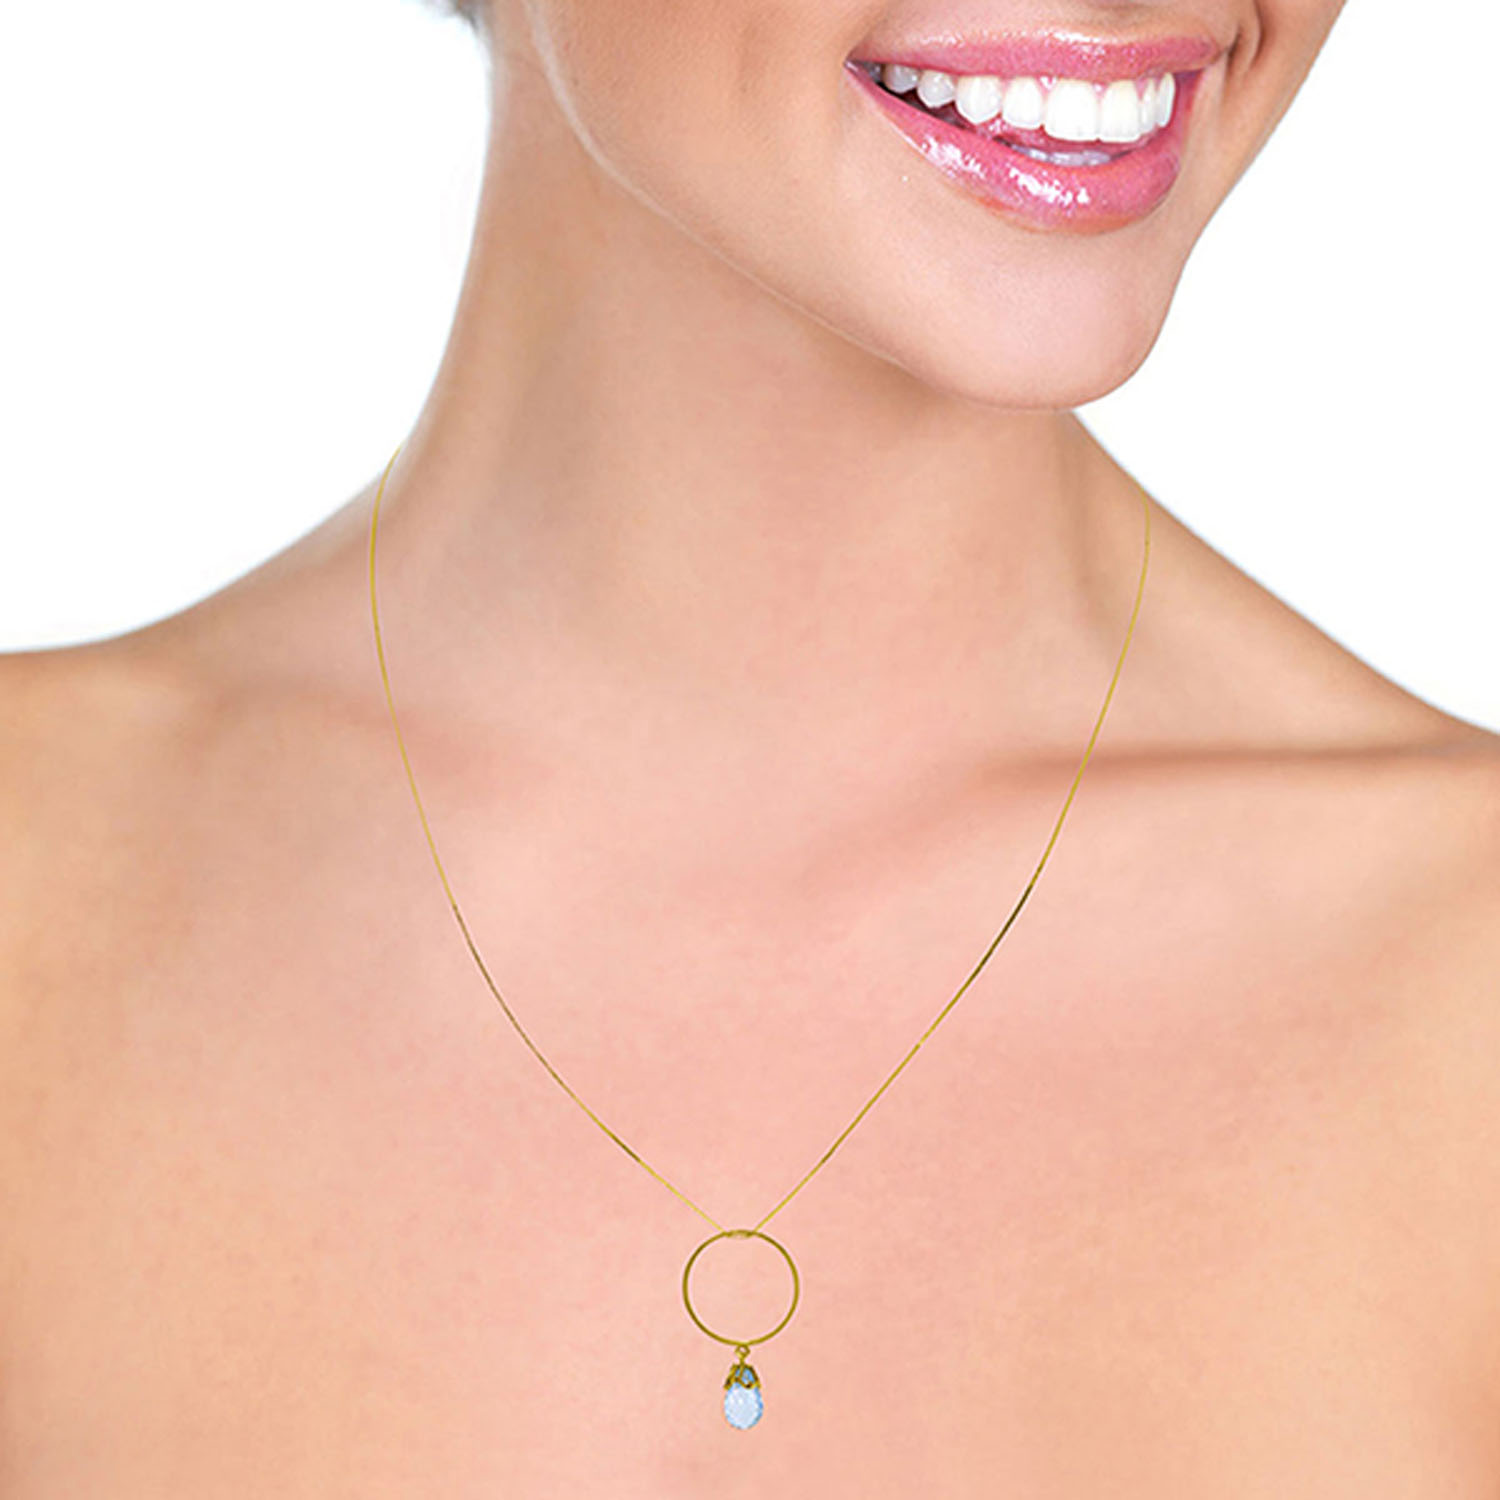 Galaxy Gold 3 Carat 14k 20" Solid Gold Necklace with Natural Blue Topaz Charm Circle Pendant - image 2 of 2